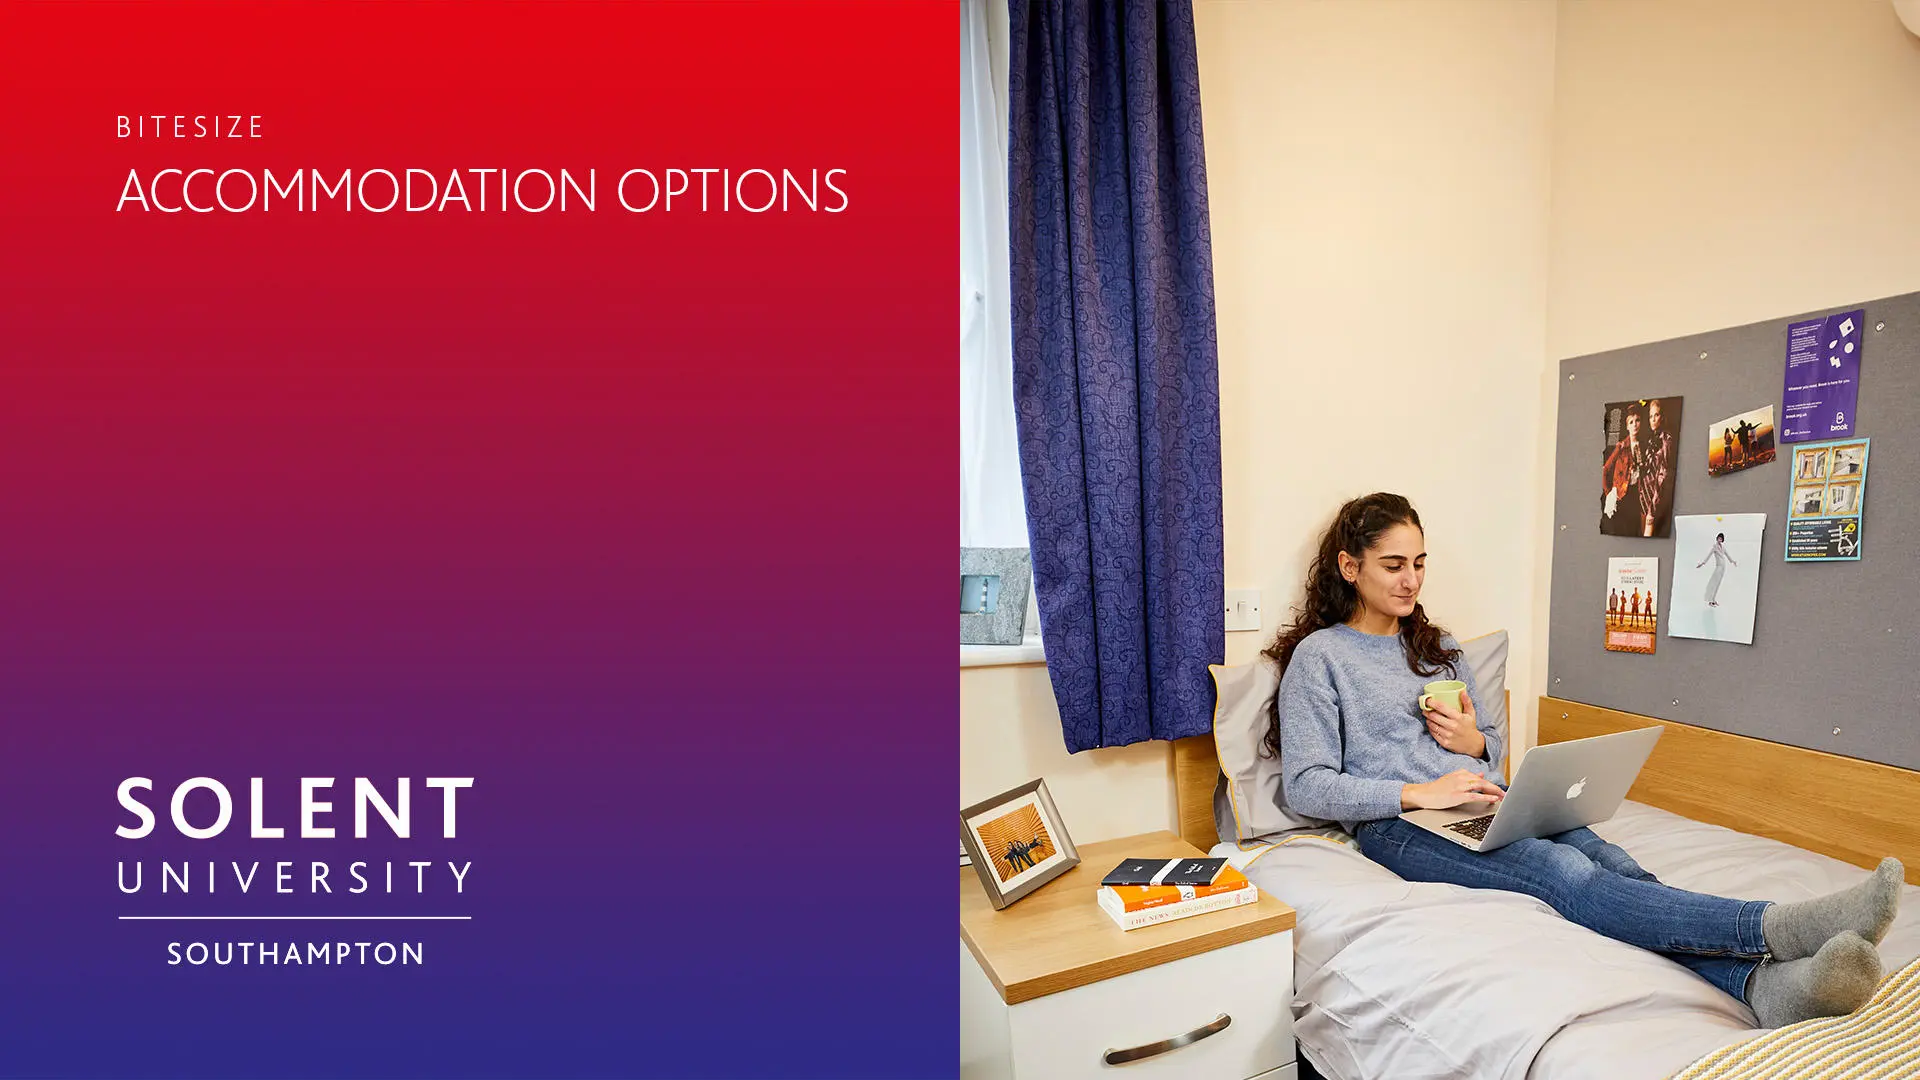 Image of a student in their bedroom on student halls, alongside the text; 'Bitesize accommodation options'. 